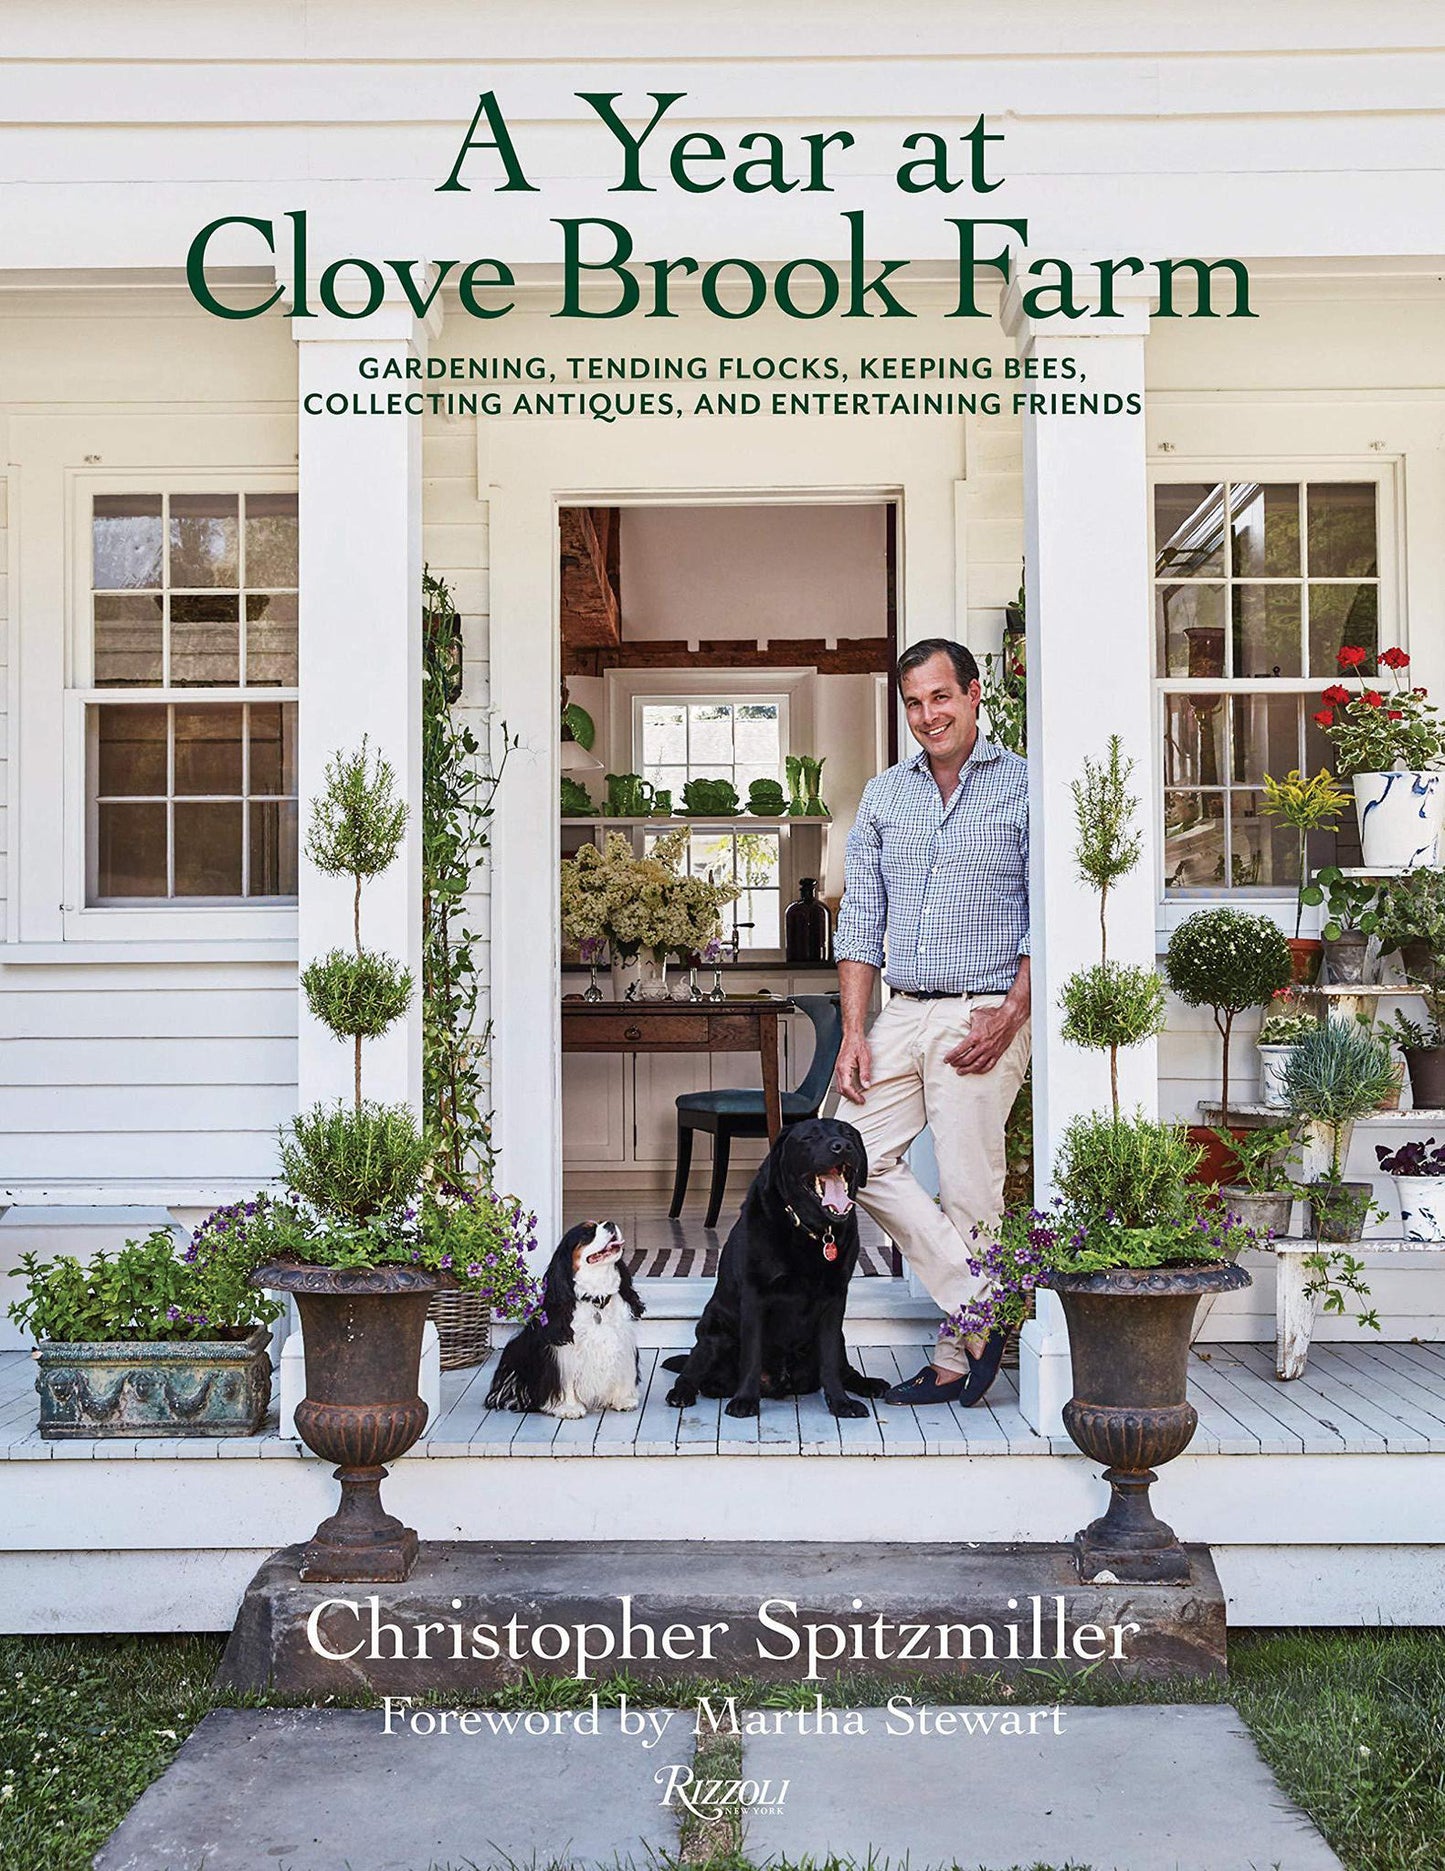 A Year at Clove Brook Farm: Gardening, Tending Flocks, Keeping Bees, Collecting Antiques, and Entertaining Friends